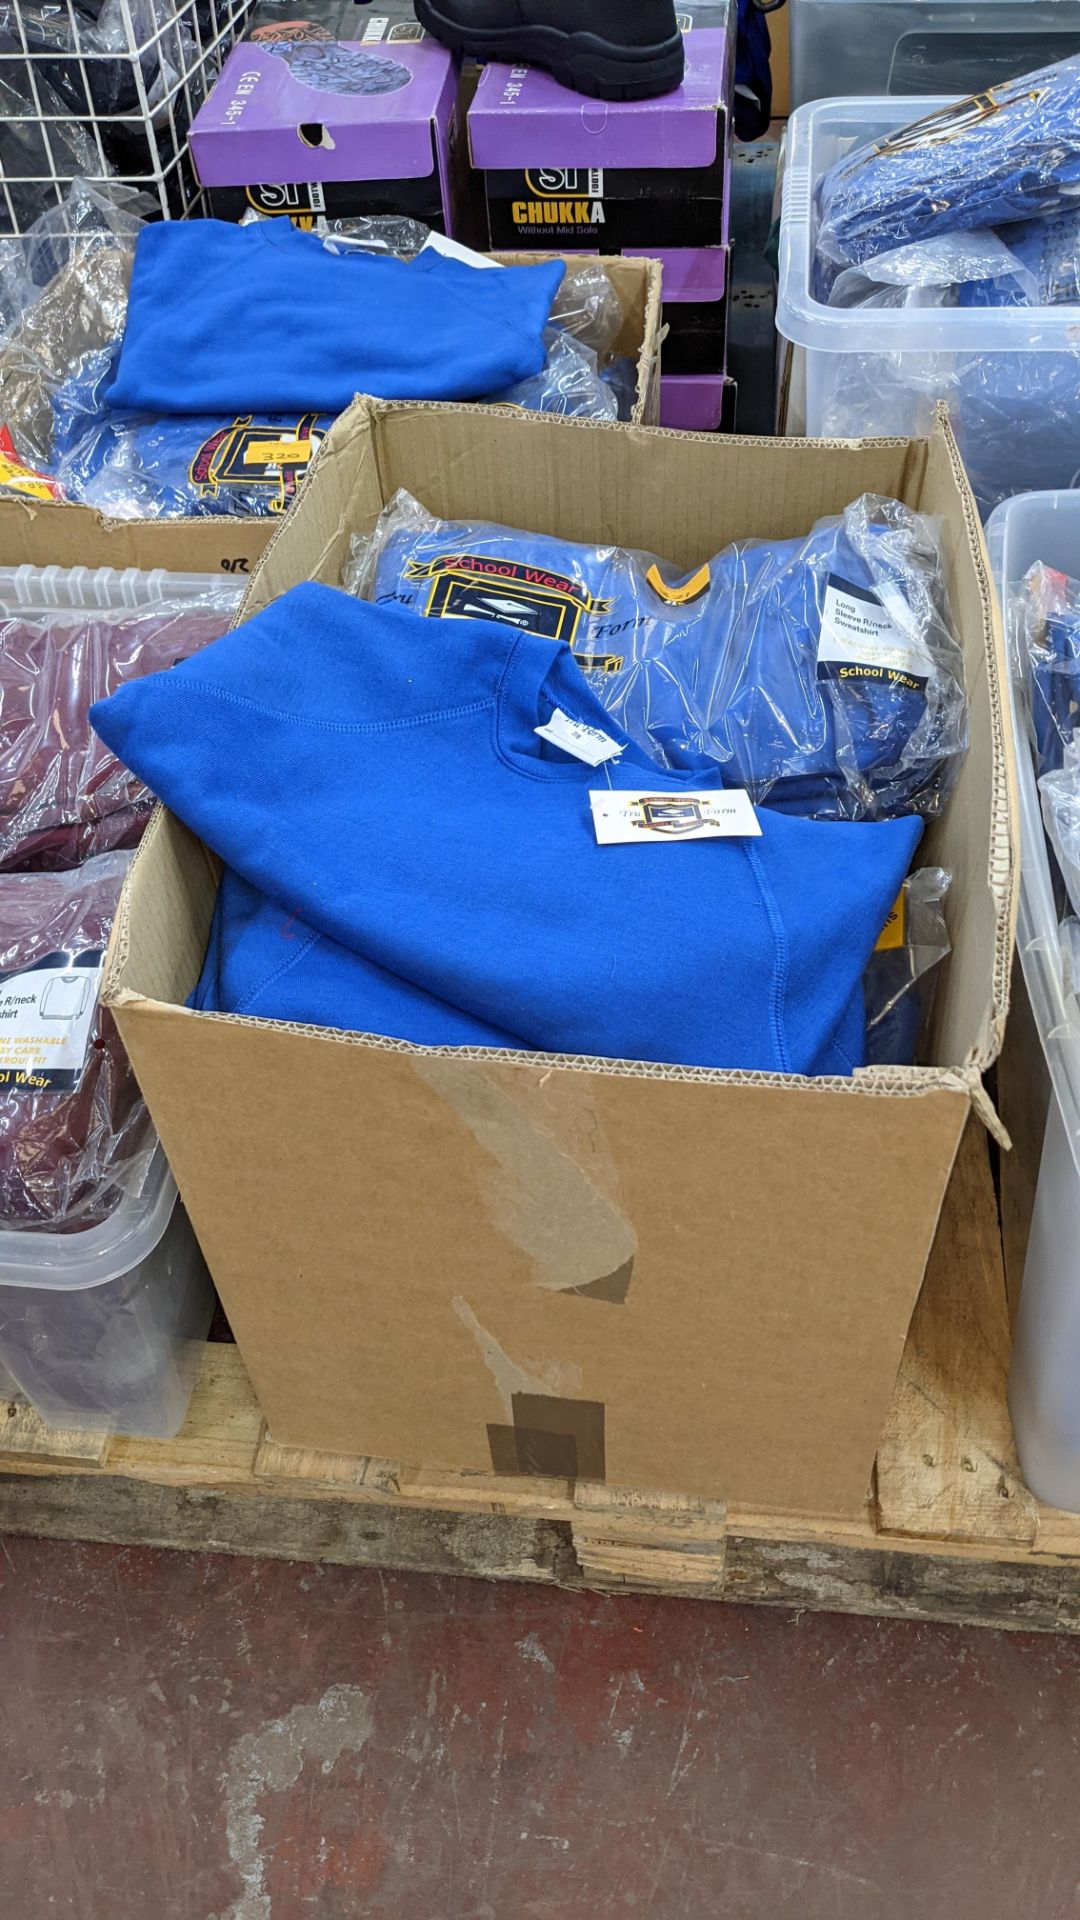 Approx 29 off blue children's sweatshirts & similar - the contents of 1 box